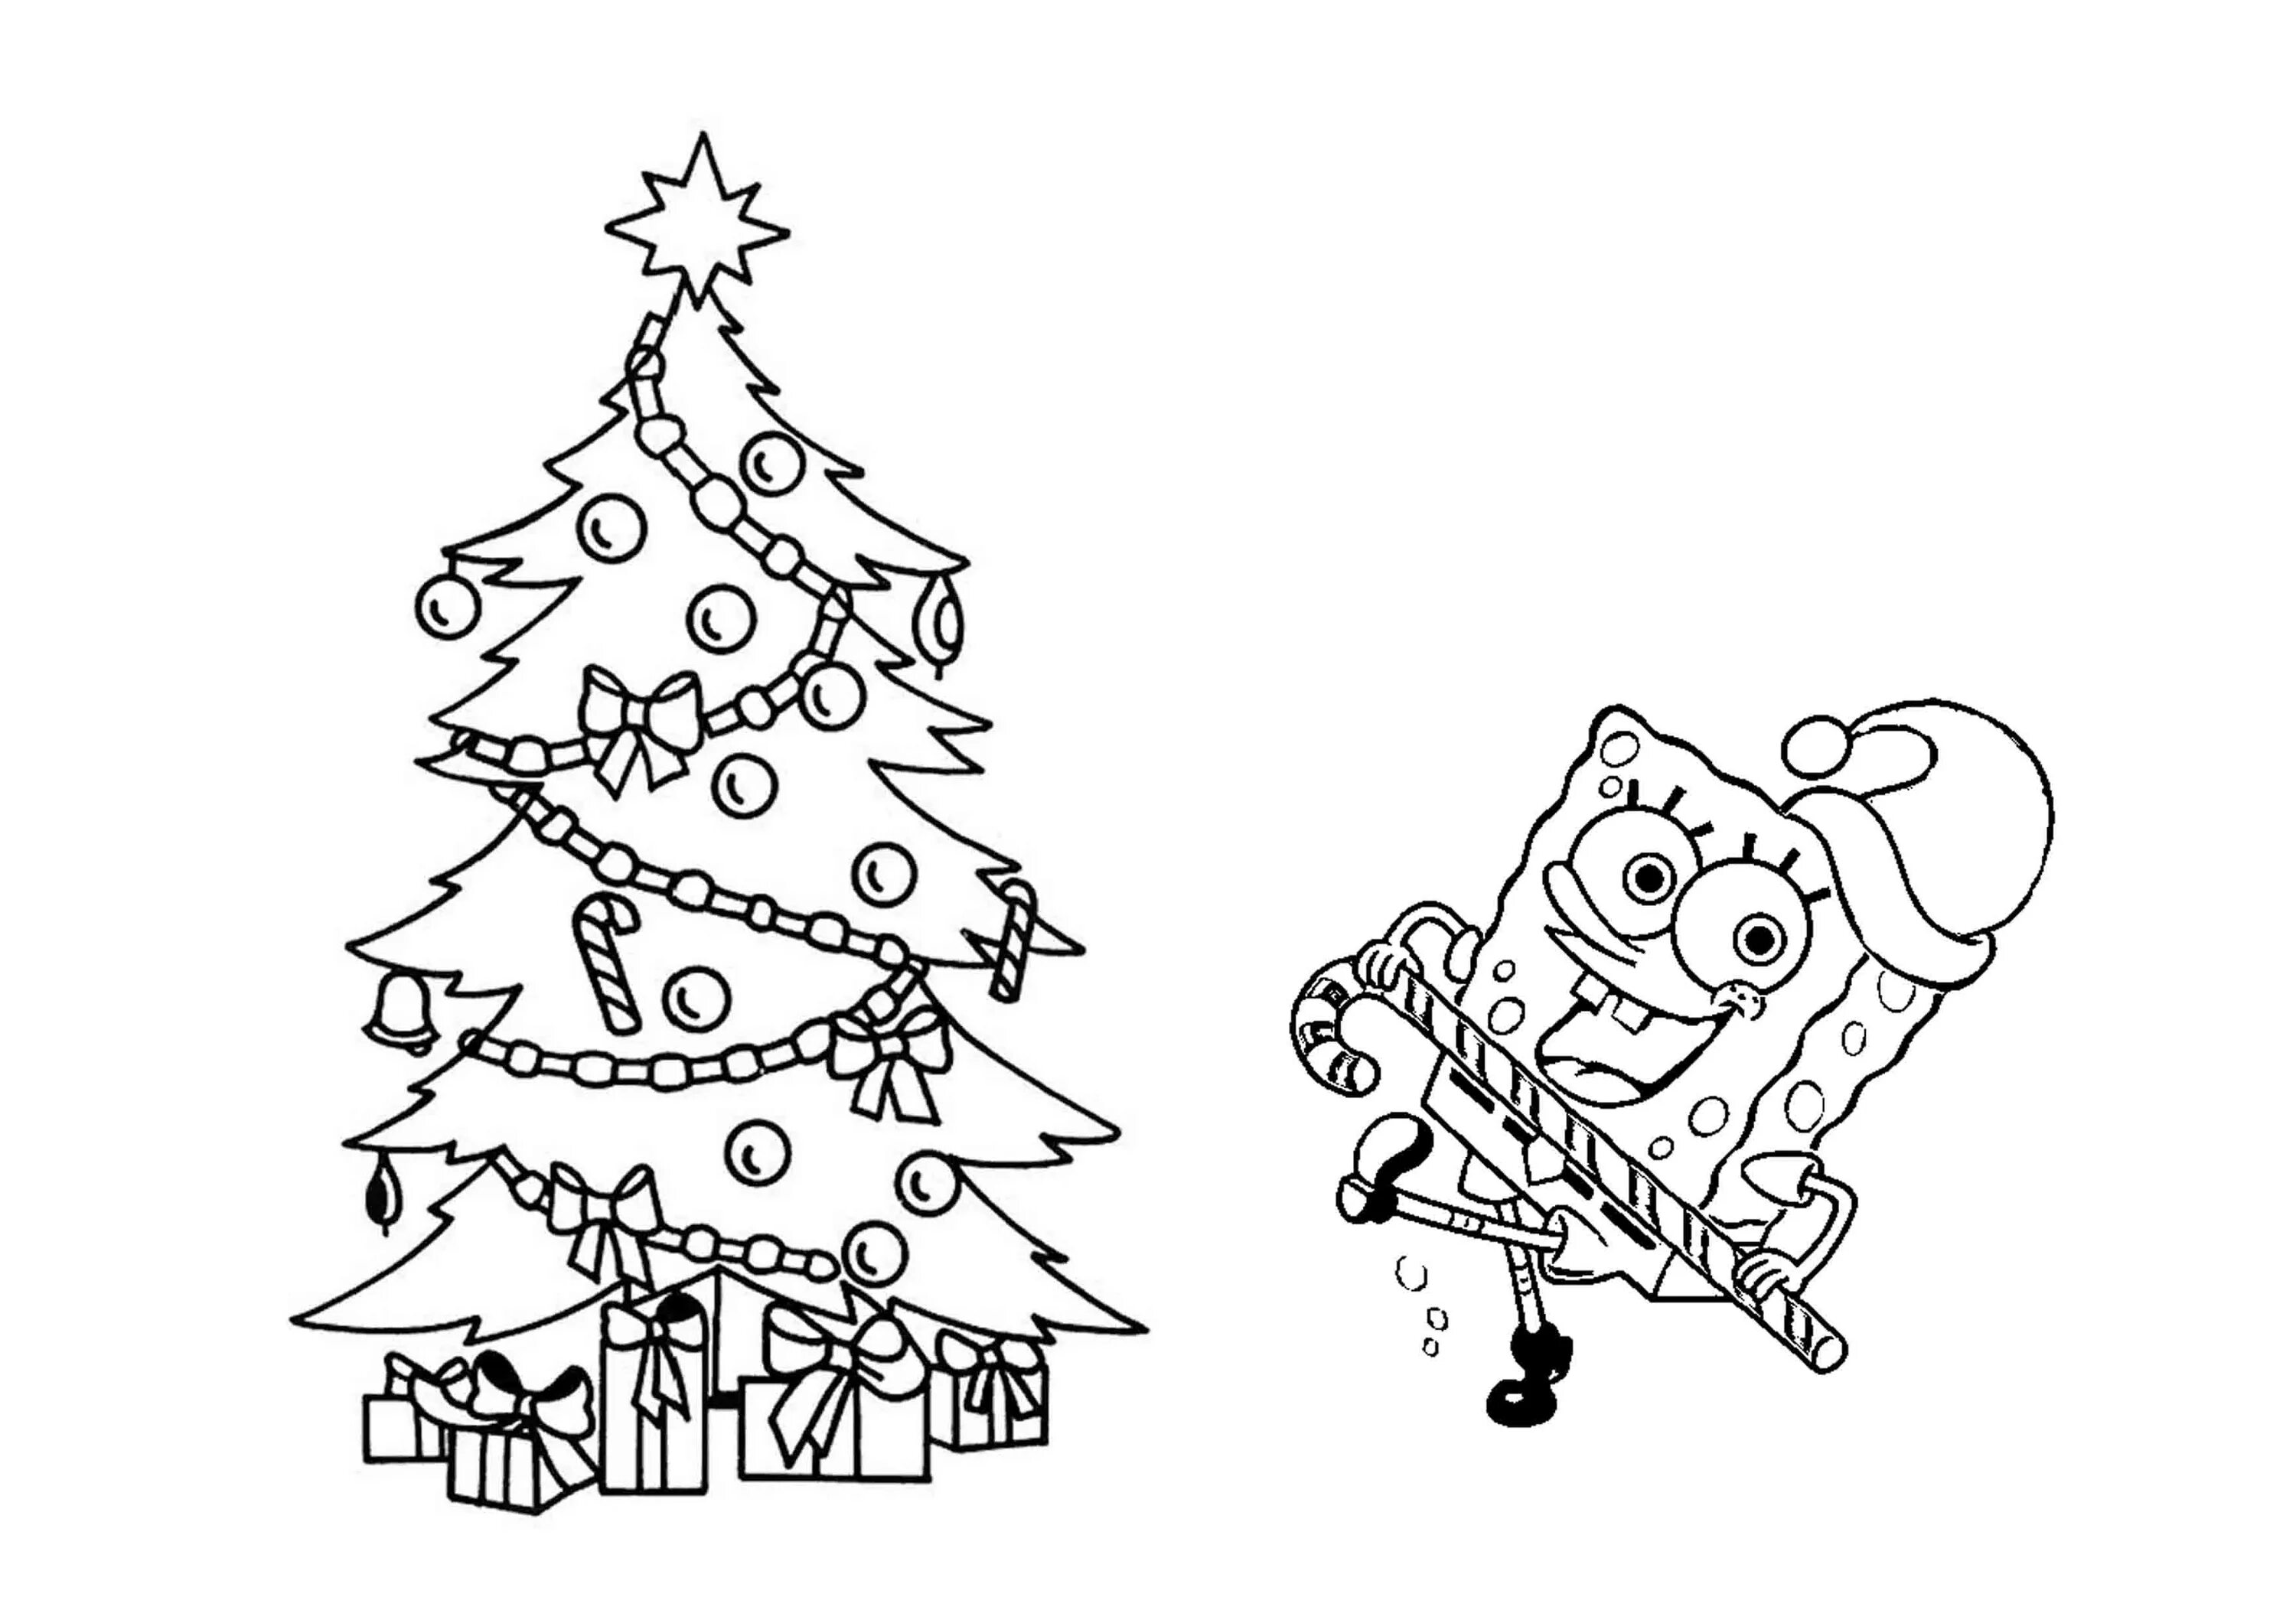 Impressive cool Christmas coloring book